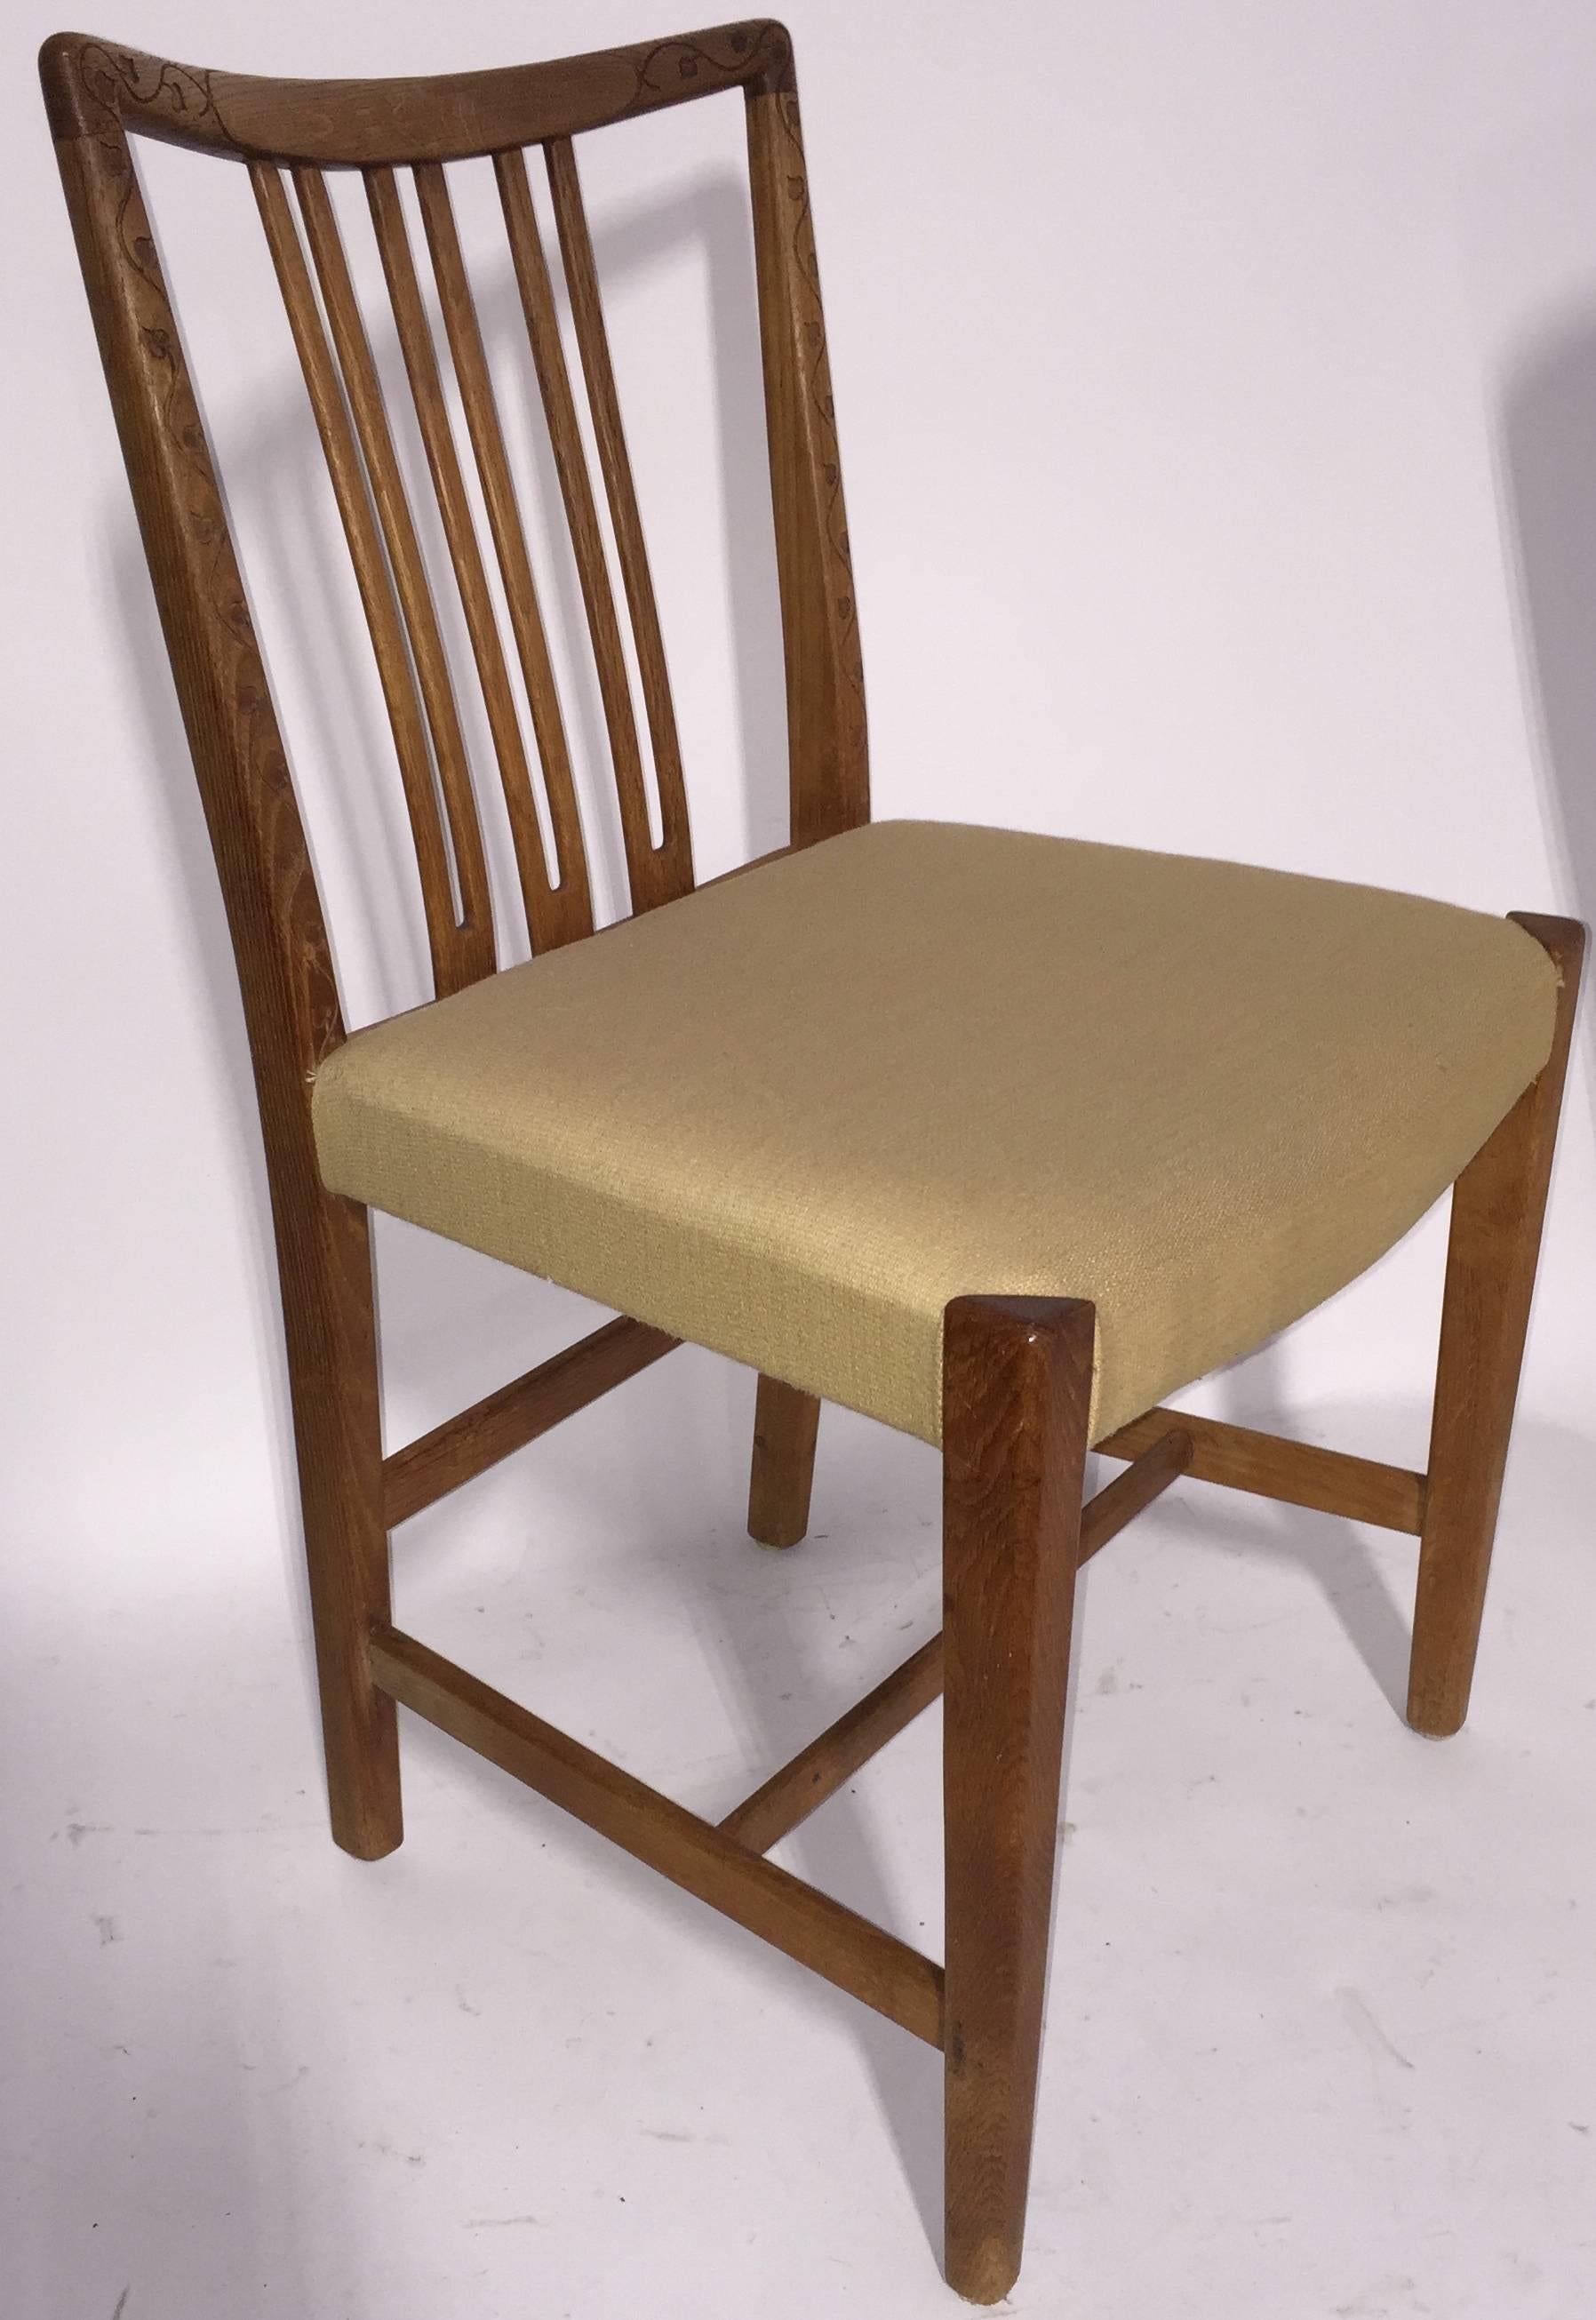 Rare early design by Hans Wegner for Mikael Laursen.  Solid Oak frame  with upholstered seat and delicate leaf and vine carving on backrest.  